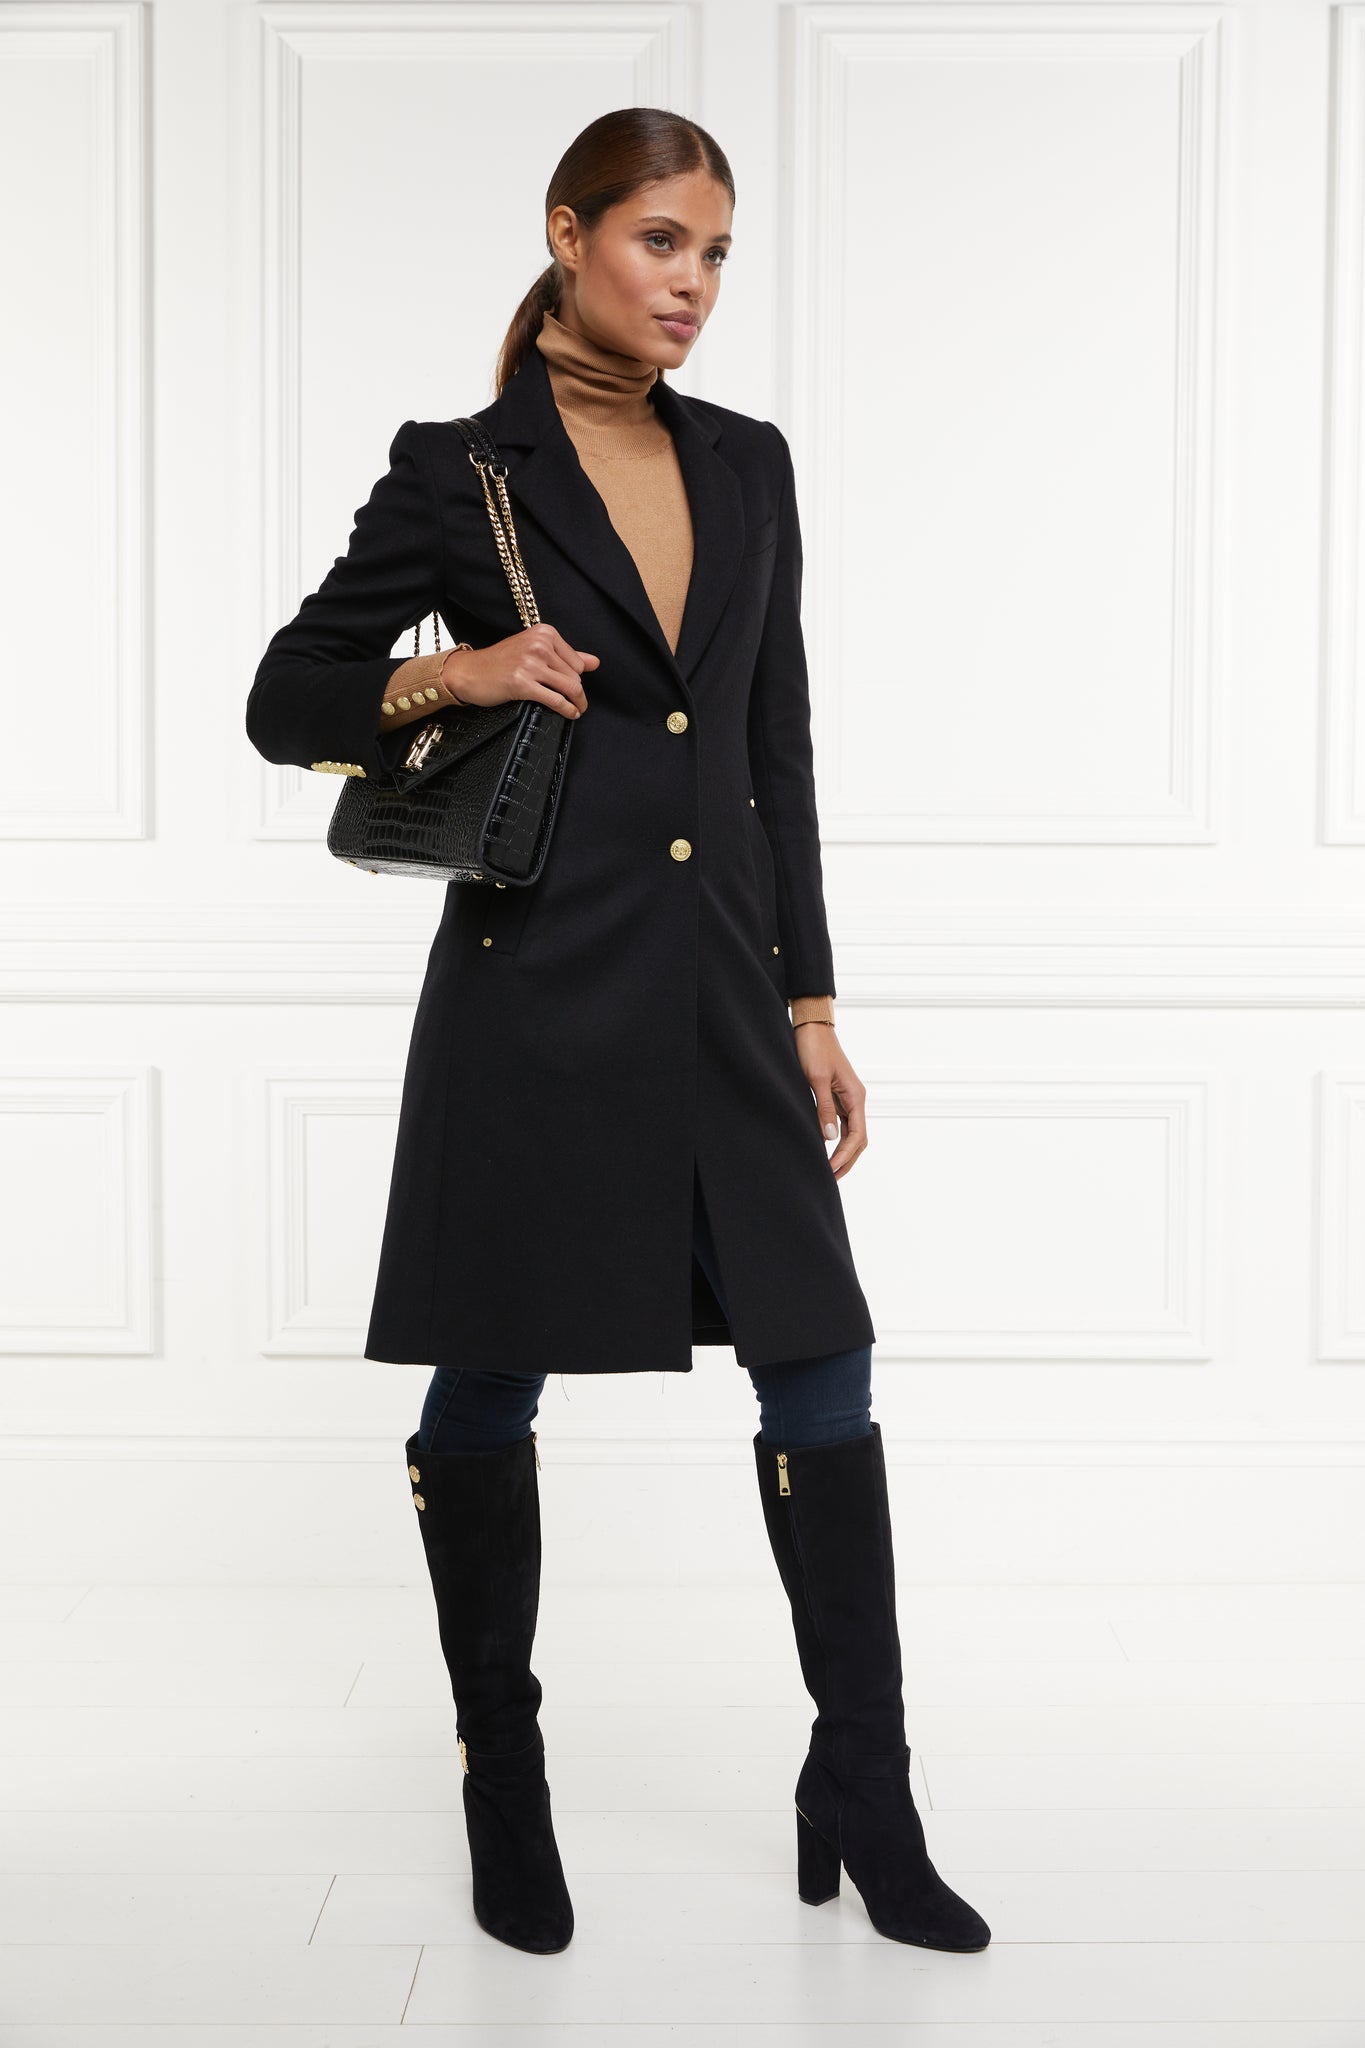 womens black wool knee length single breasted coat detailed with gold hardware